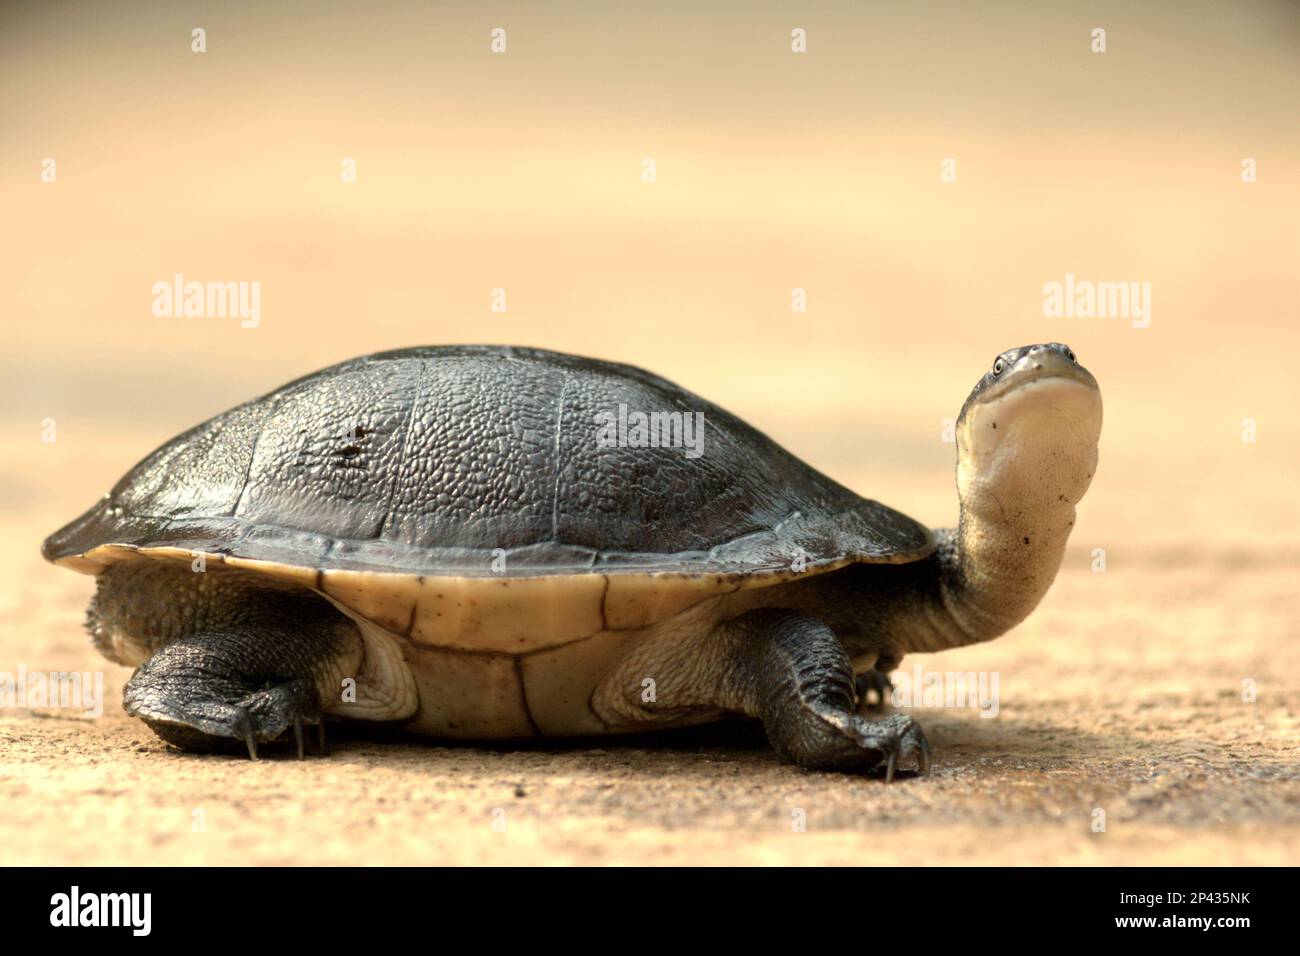 A rare and threatened species of freshwater turtle, the critically endangered Rote Island's endemic snake-necked turtle (Chelodina mccordi) is photographed at a licensed ex-situ breeding facility in Jakarta, Indonesia. Scientific research suggests that reptile richness is likely to decrease significantly across most parts of the world with ongoing future climate change. 'Together with other anthropogenic impacts, such as habitat loss and harvesting of species, this is a cause for concern,' wrote a team of scientists led by Matthias Biber (Technical University of Munich). Stock Photo